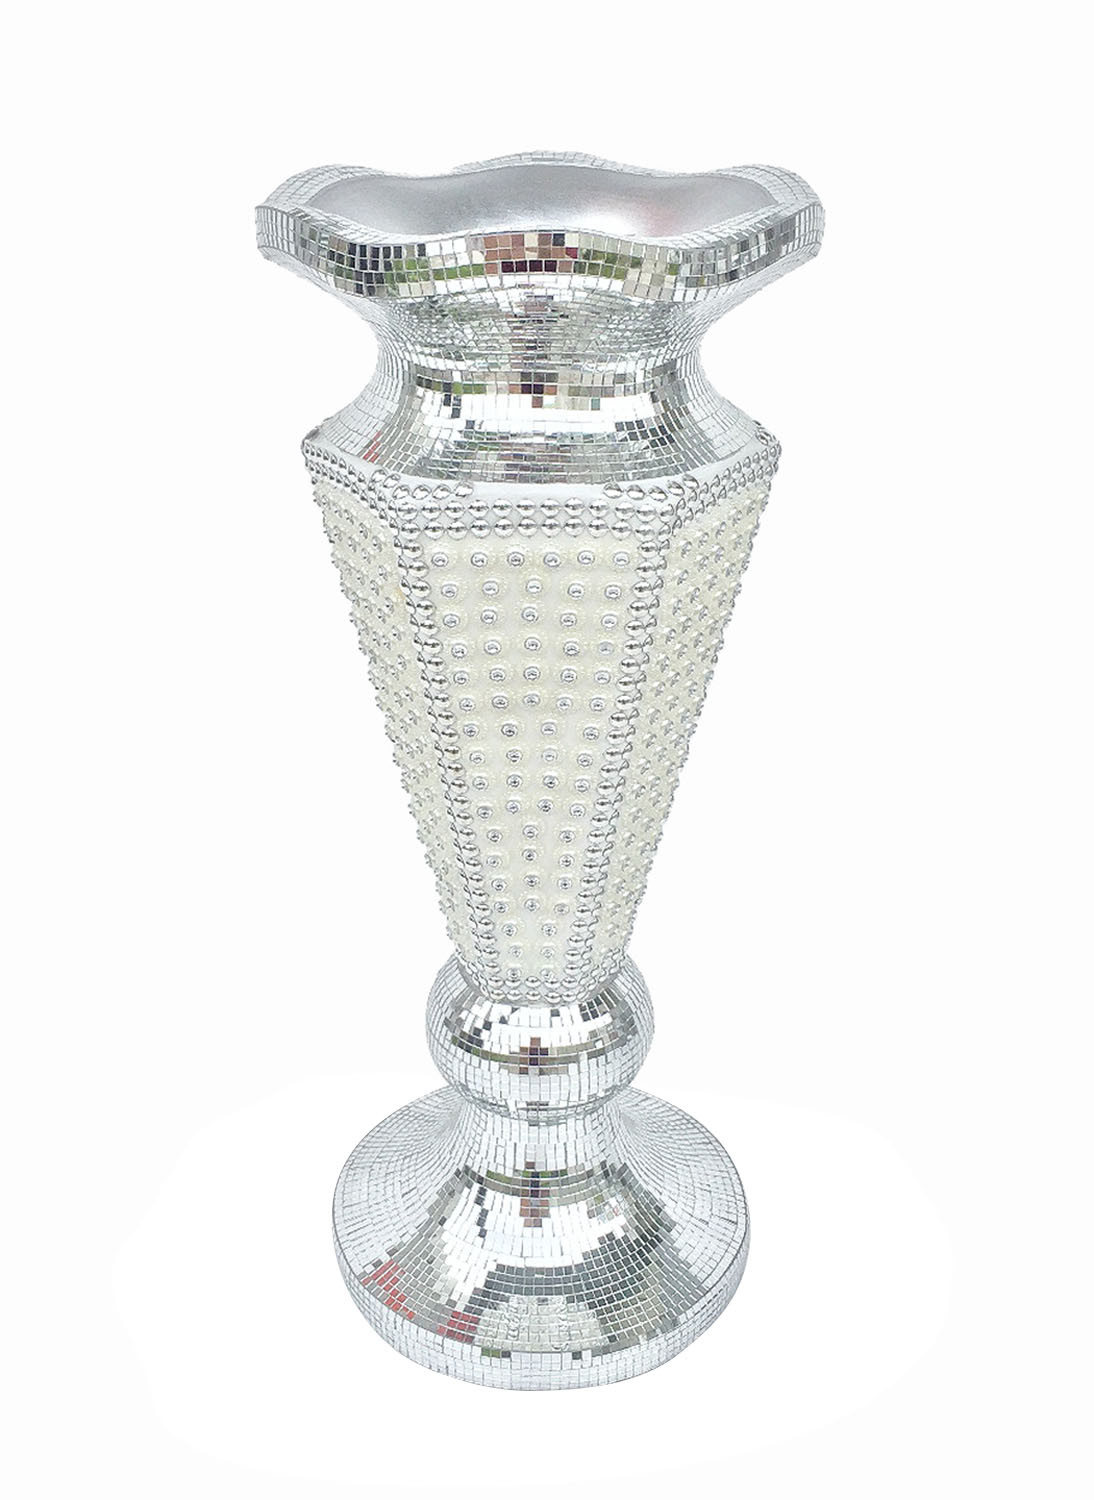 13 attractive 24 Inch Glass Vase 2024 free download 24 inch glass vase of dlusso designs daniela bling design 24 inch vase walmart com inside 4bc45538 6563 4b7d b8a6 a4cf256c39fa 1 ed504b9f10bf275a50d02a82d8ee8293